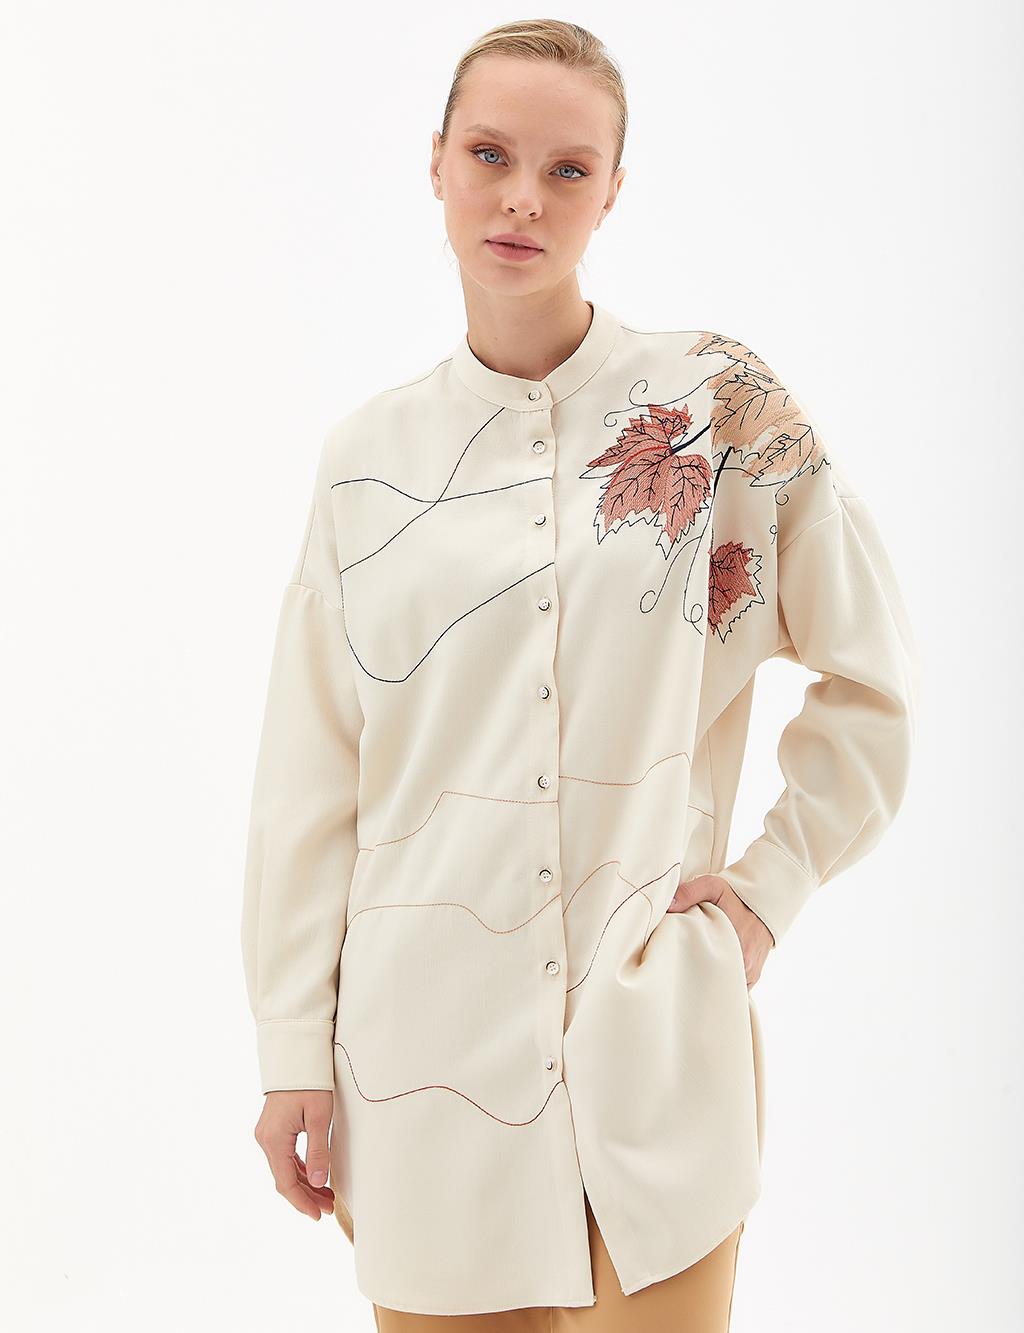 Patterned Contrast Stitched Collar Shirt Cream